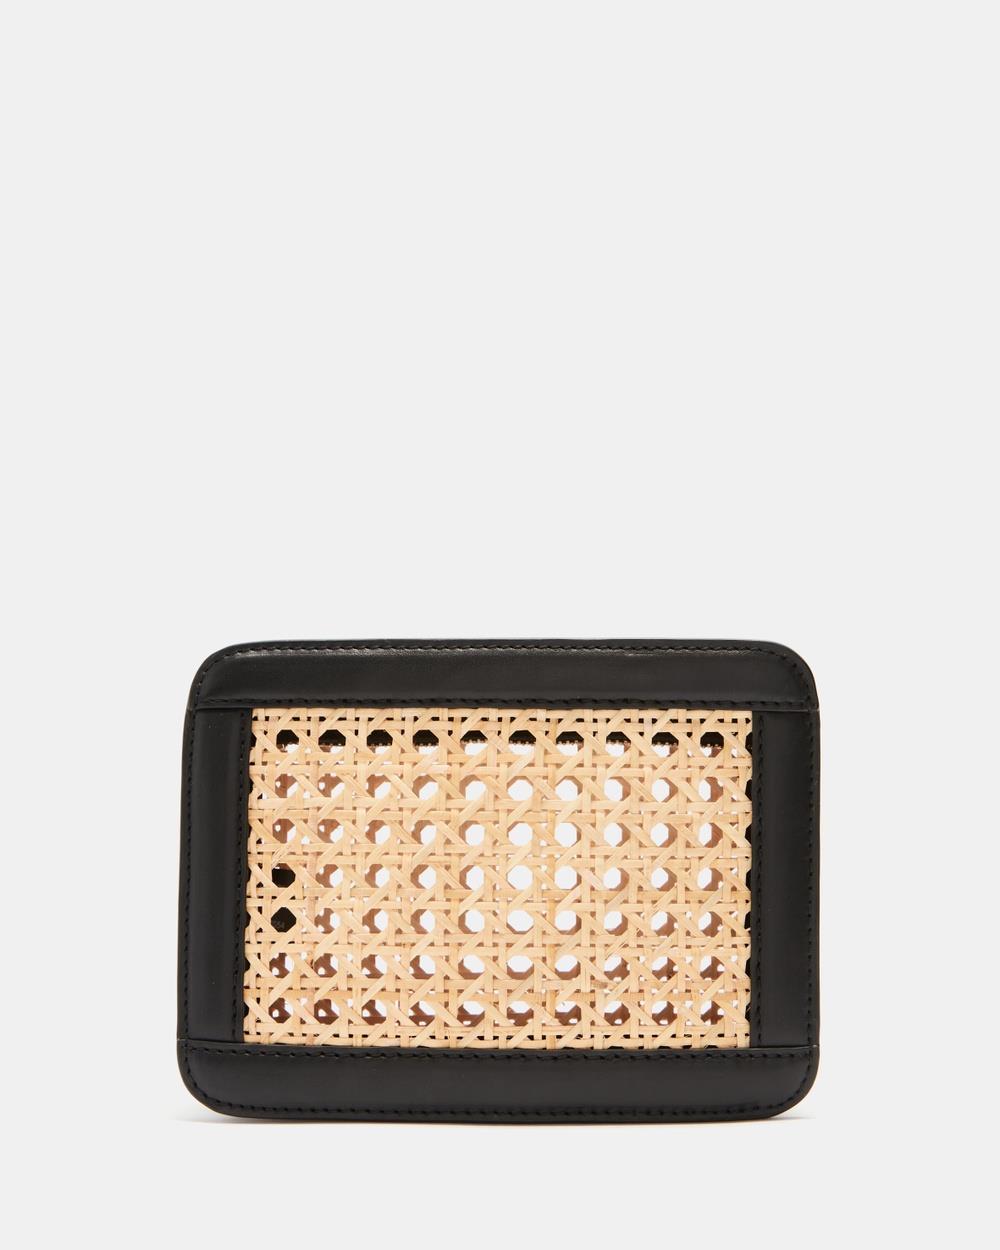 Atmos&Here - Rattan Leather Clutch - Clutches (Rattan & Black Leather) Rattan Leather Clutch